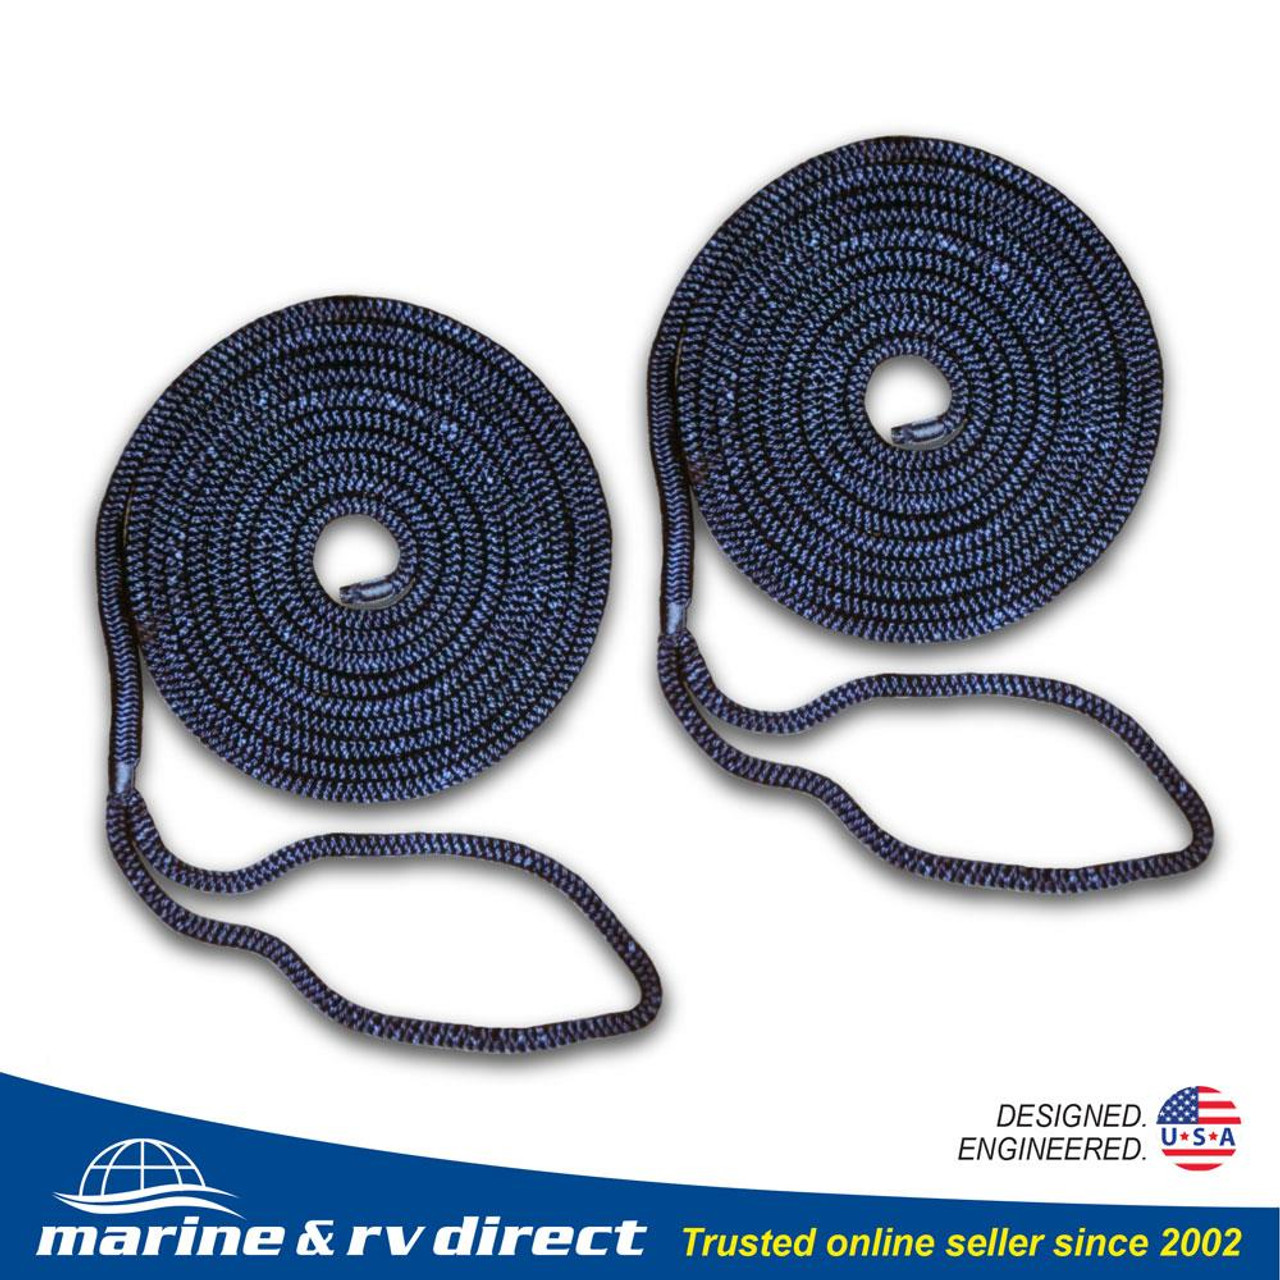 2 PCS 3/8 Inch 15 FT Double Braided 16 Strand Nylon Dock Line Mooring Line  Boat Dock Rope NAVY BLUE - Marine and RV Direct